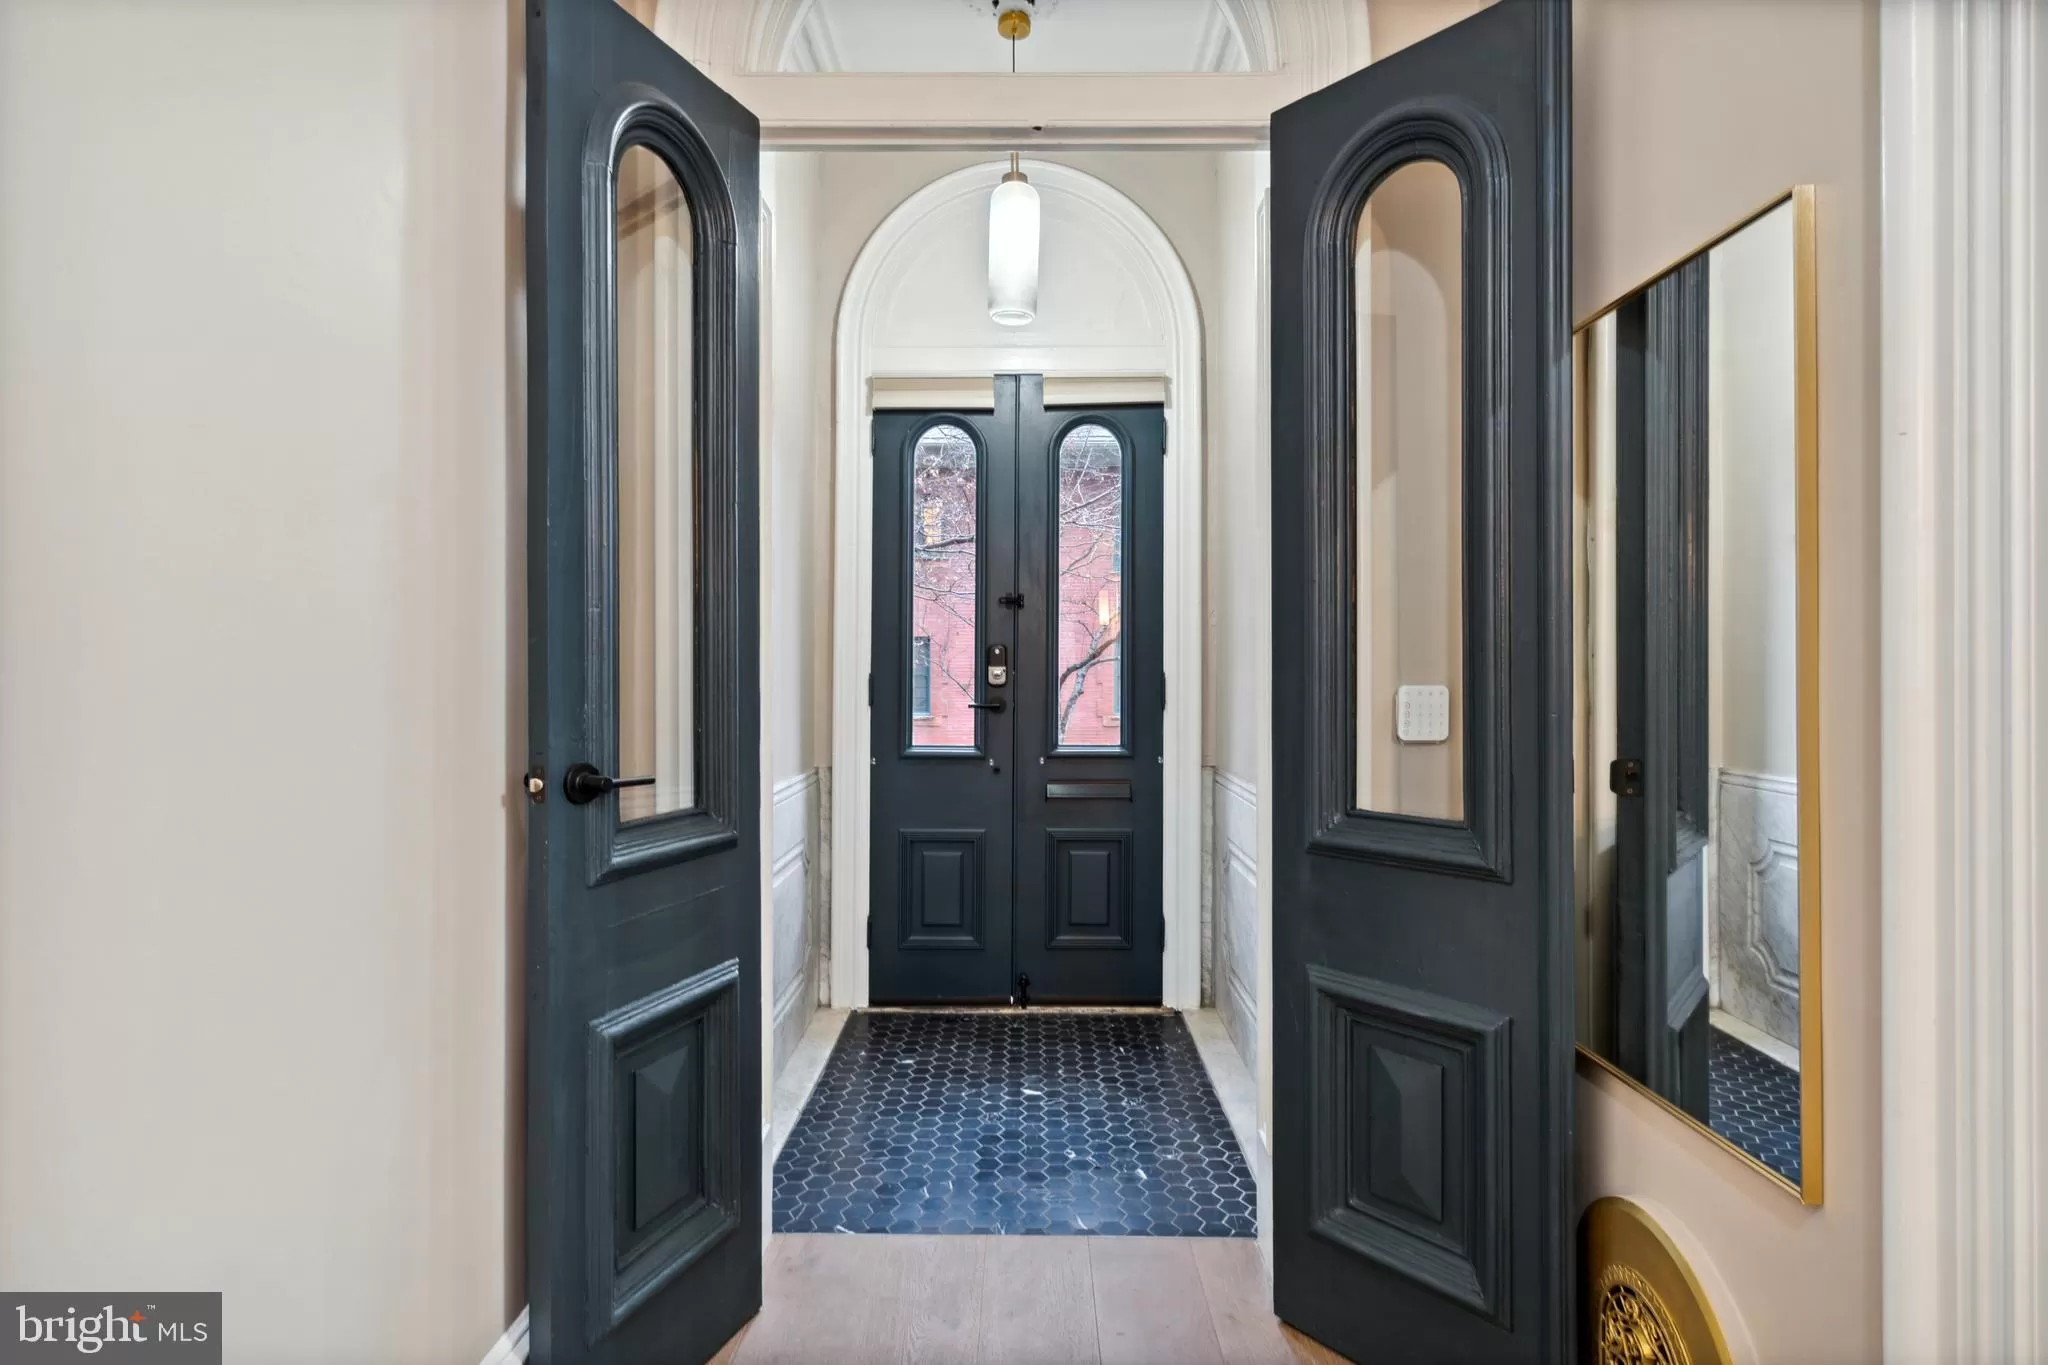 Vestibule with White and Gray Bench - Transitional - Entrance/foyer